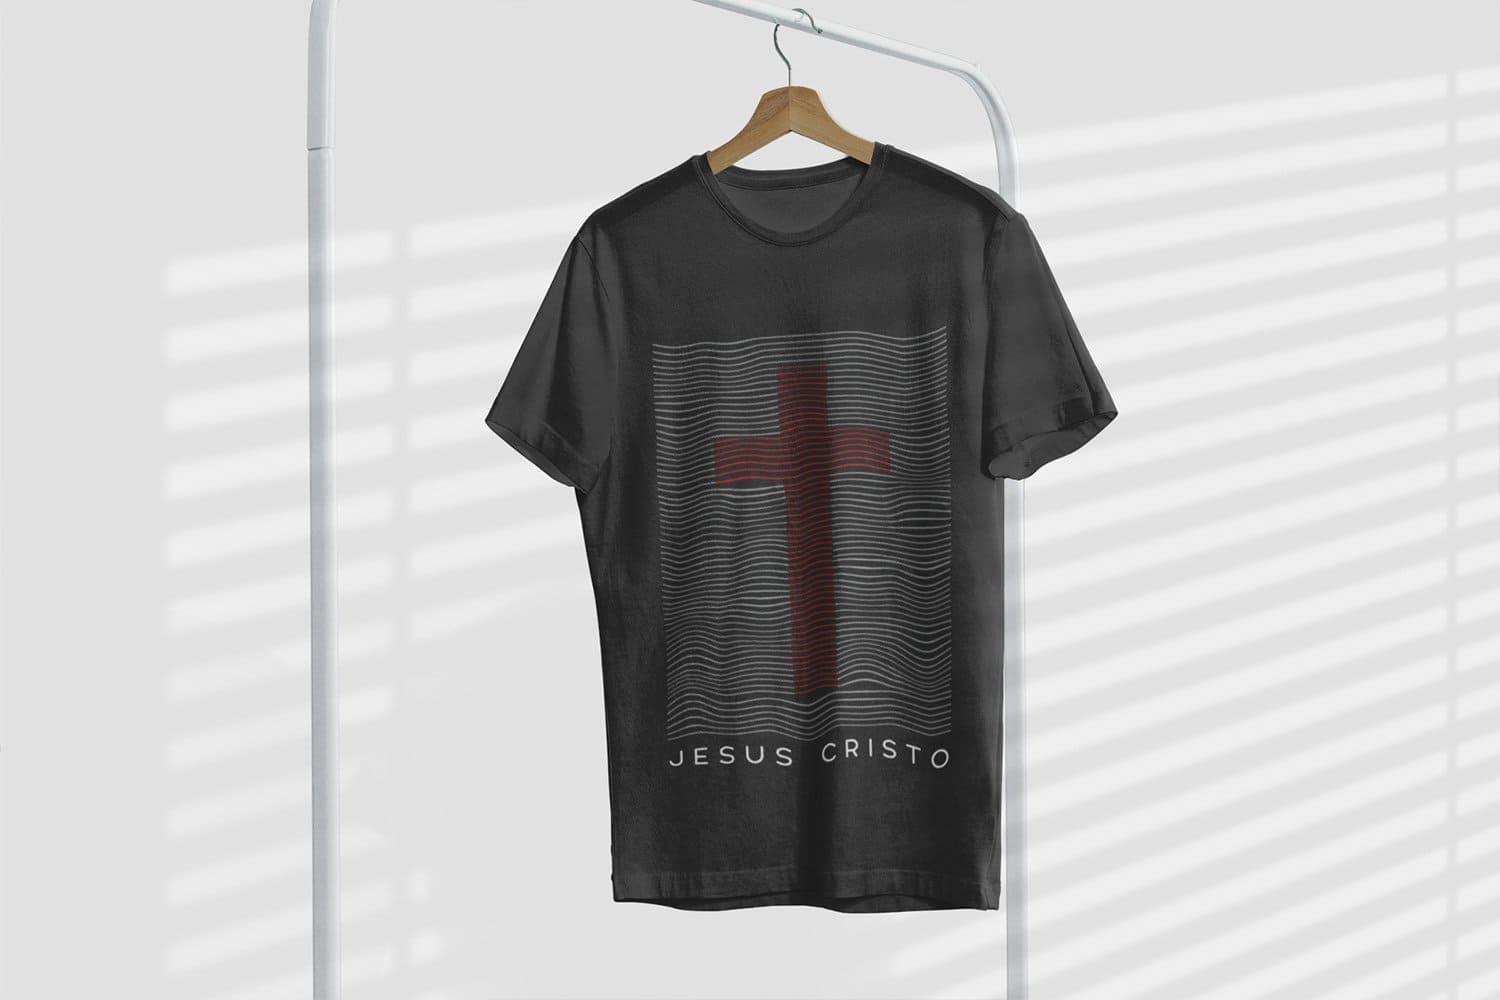 A black t-shirt with a print of Jesus Christ under a red cross hanging on a hanger.